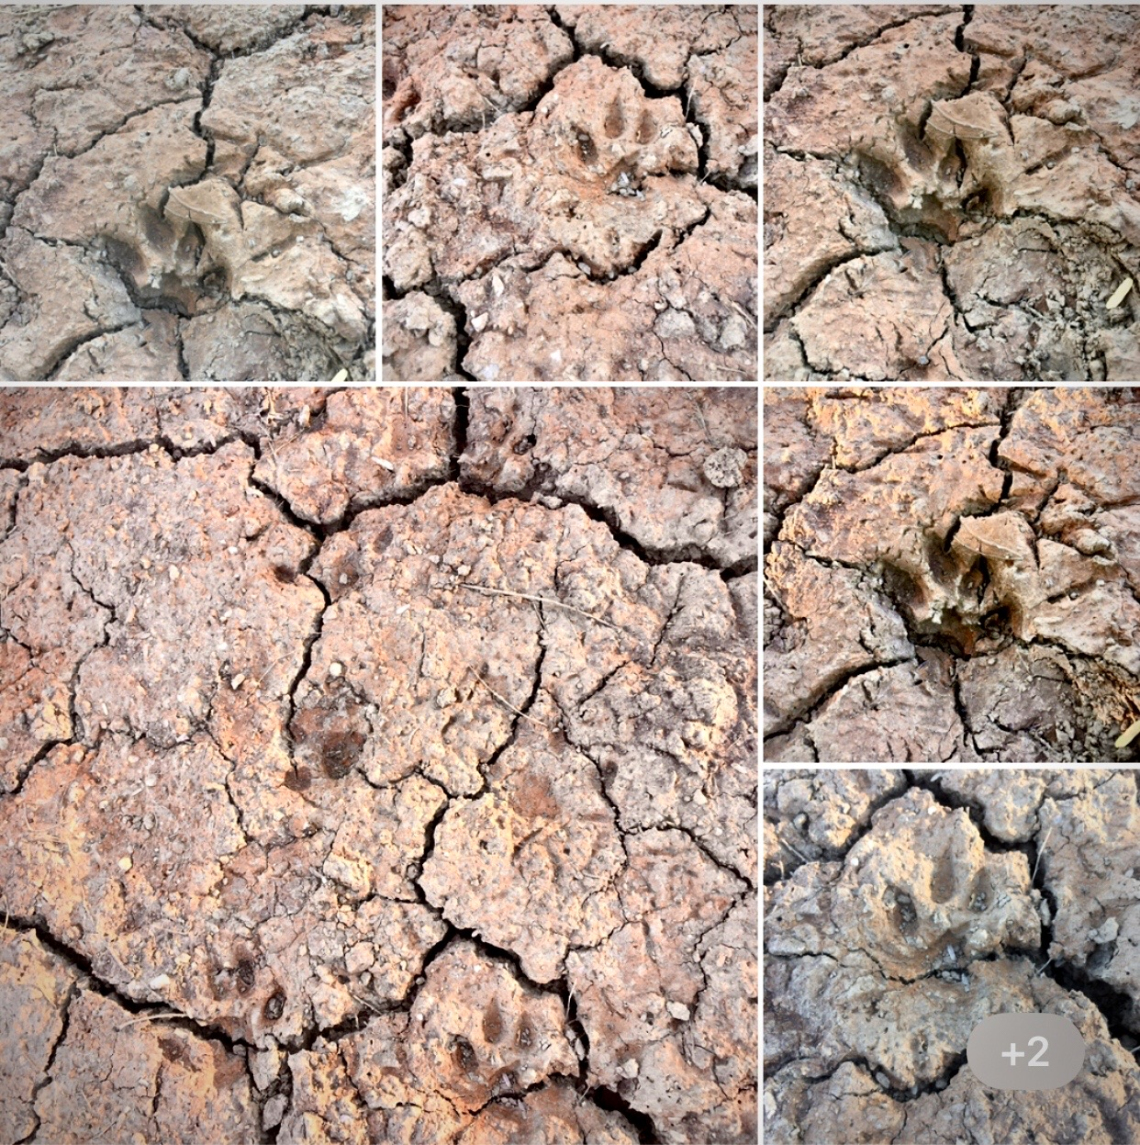 Donna Vetter photo showing animals paw prints in dry cracked earth